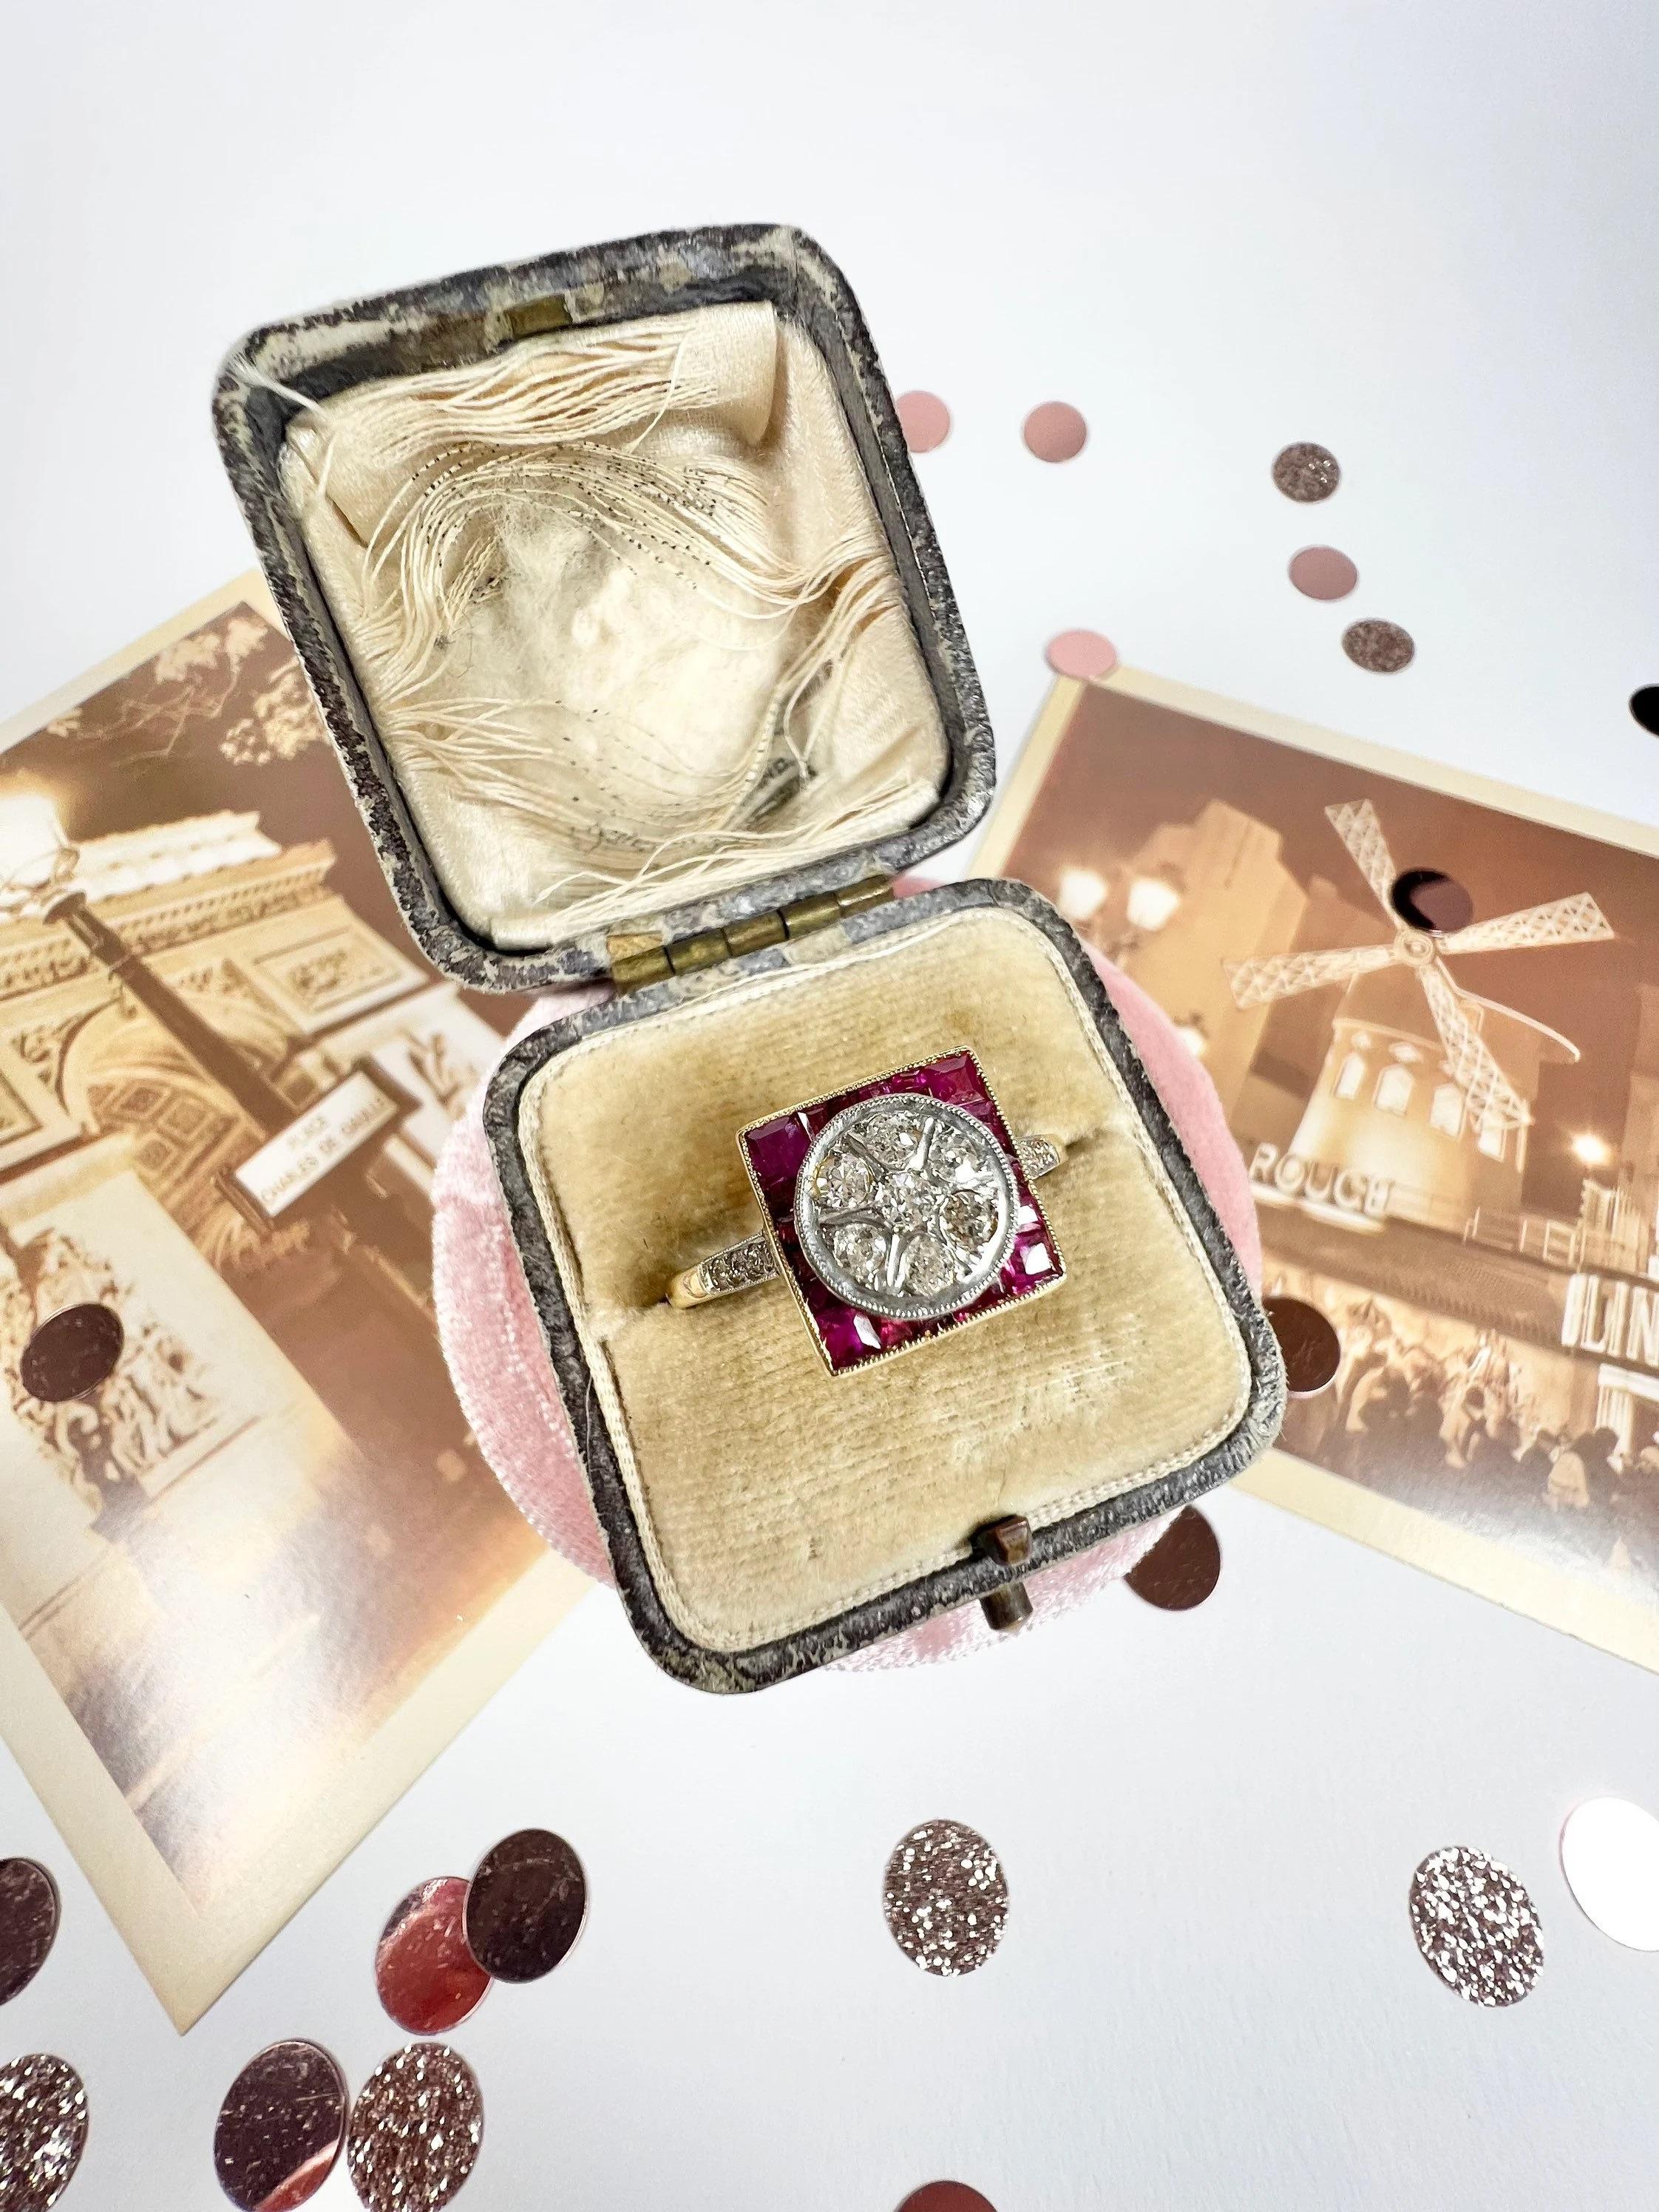 Antique Art Deco Ring

18ct Gold Tested 

Circa 1920’s

Fabulous, Art Deco ring. A beautiful square setting filled with natural calibrated rubies & a centre circle of natural, sparkling diamonds. 
Complimented beautifully with diamond shoulders, set